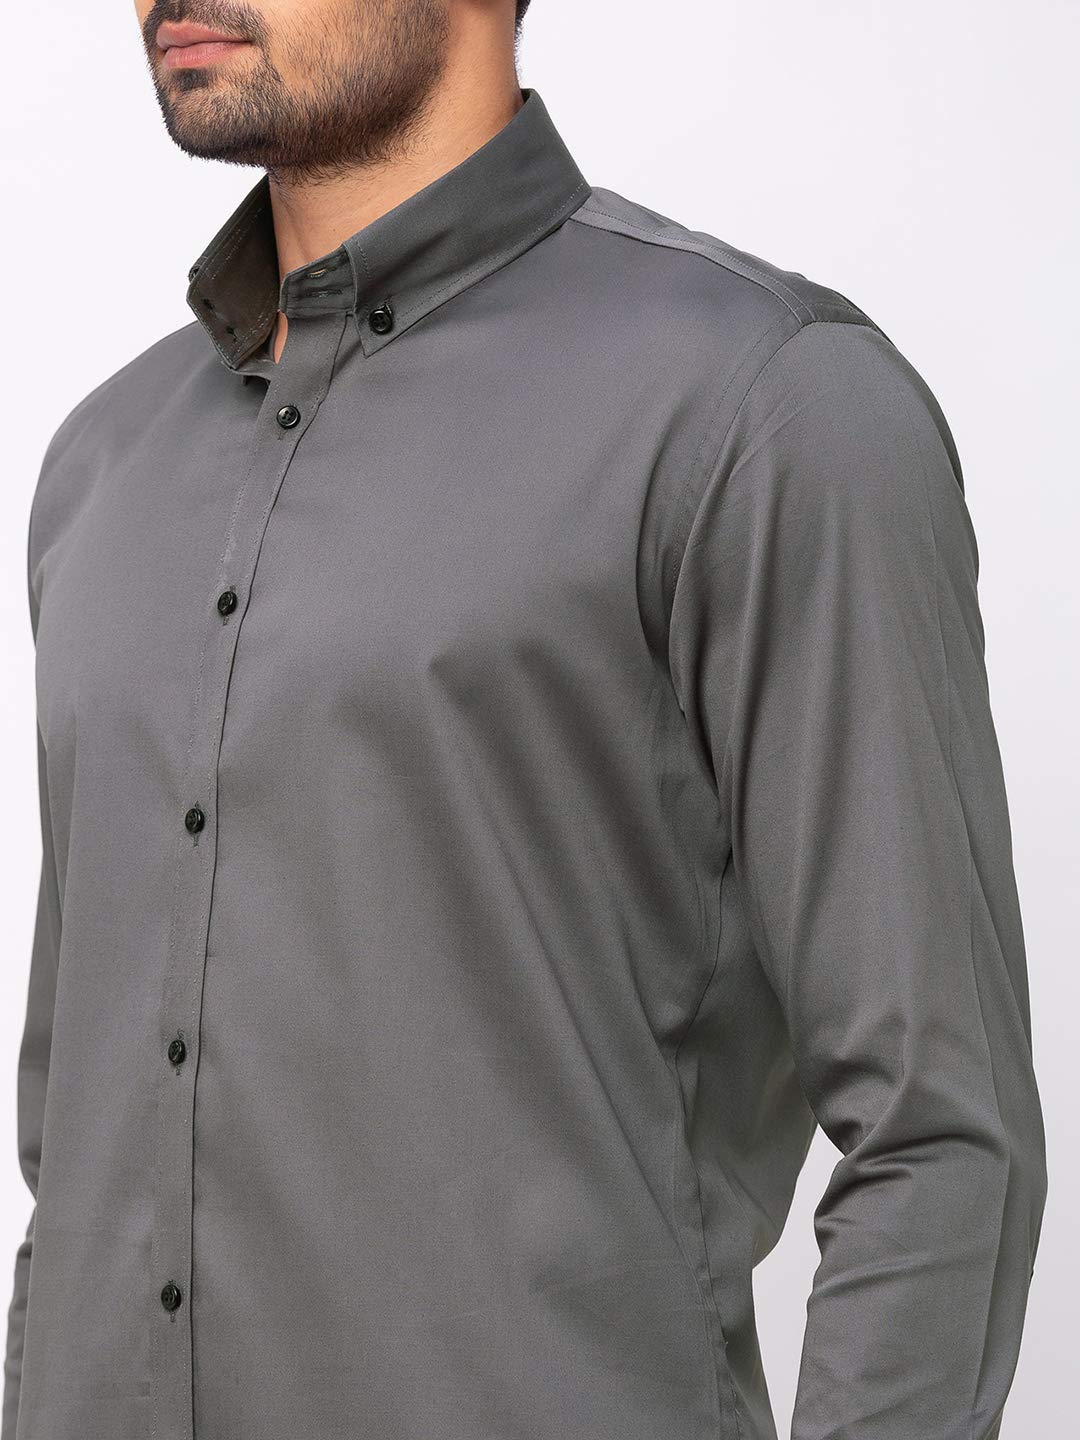 Grey Formal Shirt with Button-down Collar